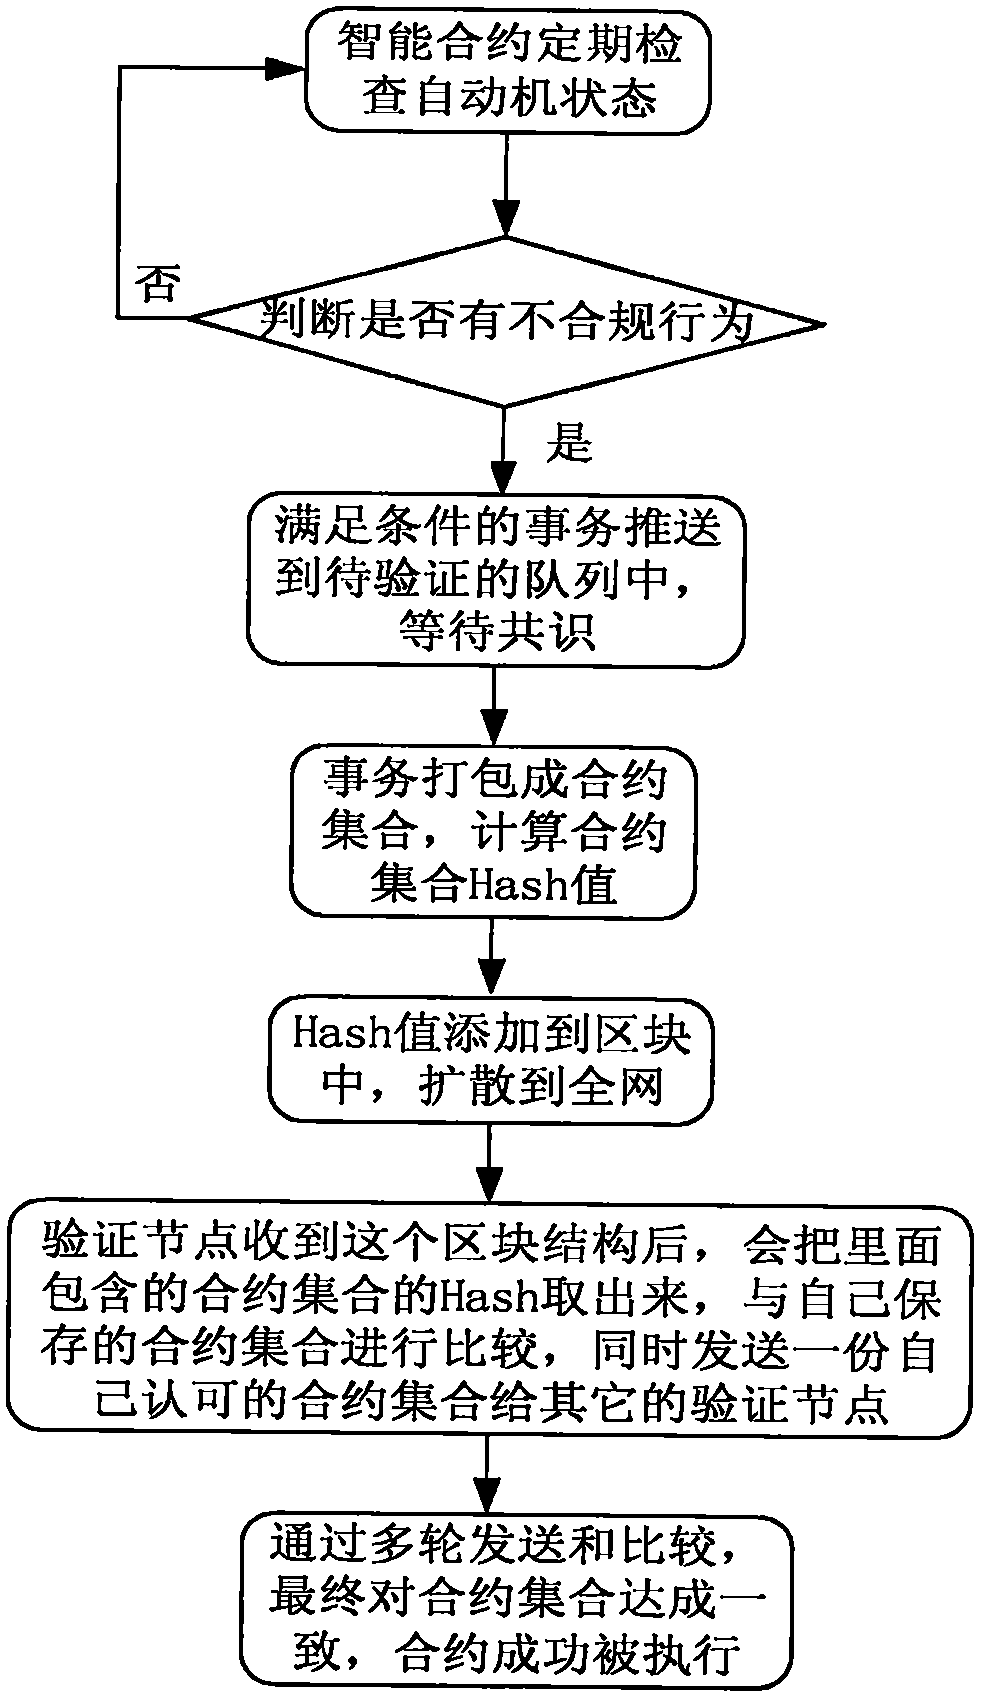 Specific personnel behavior supervision system and method based on blockchain and smart contract